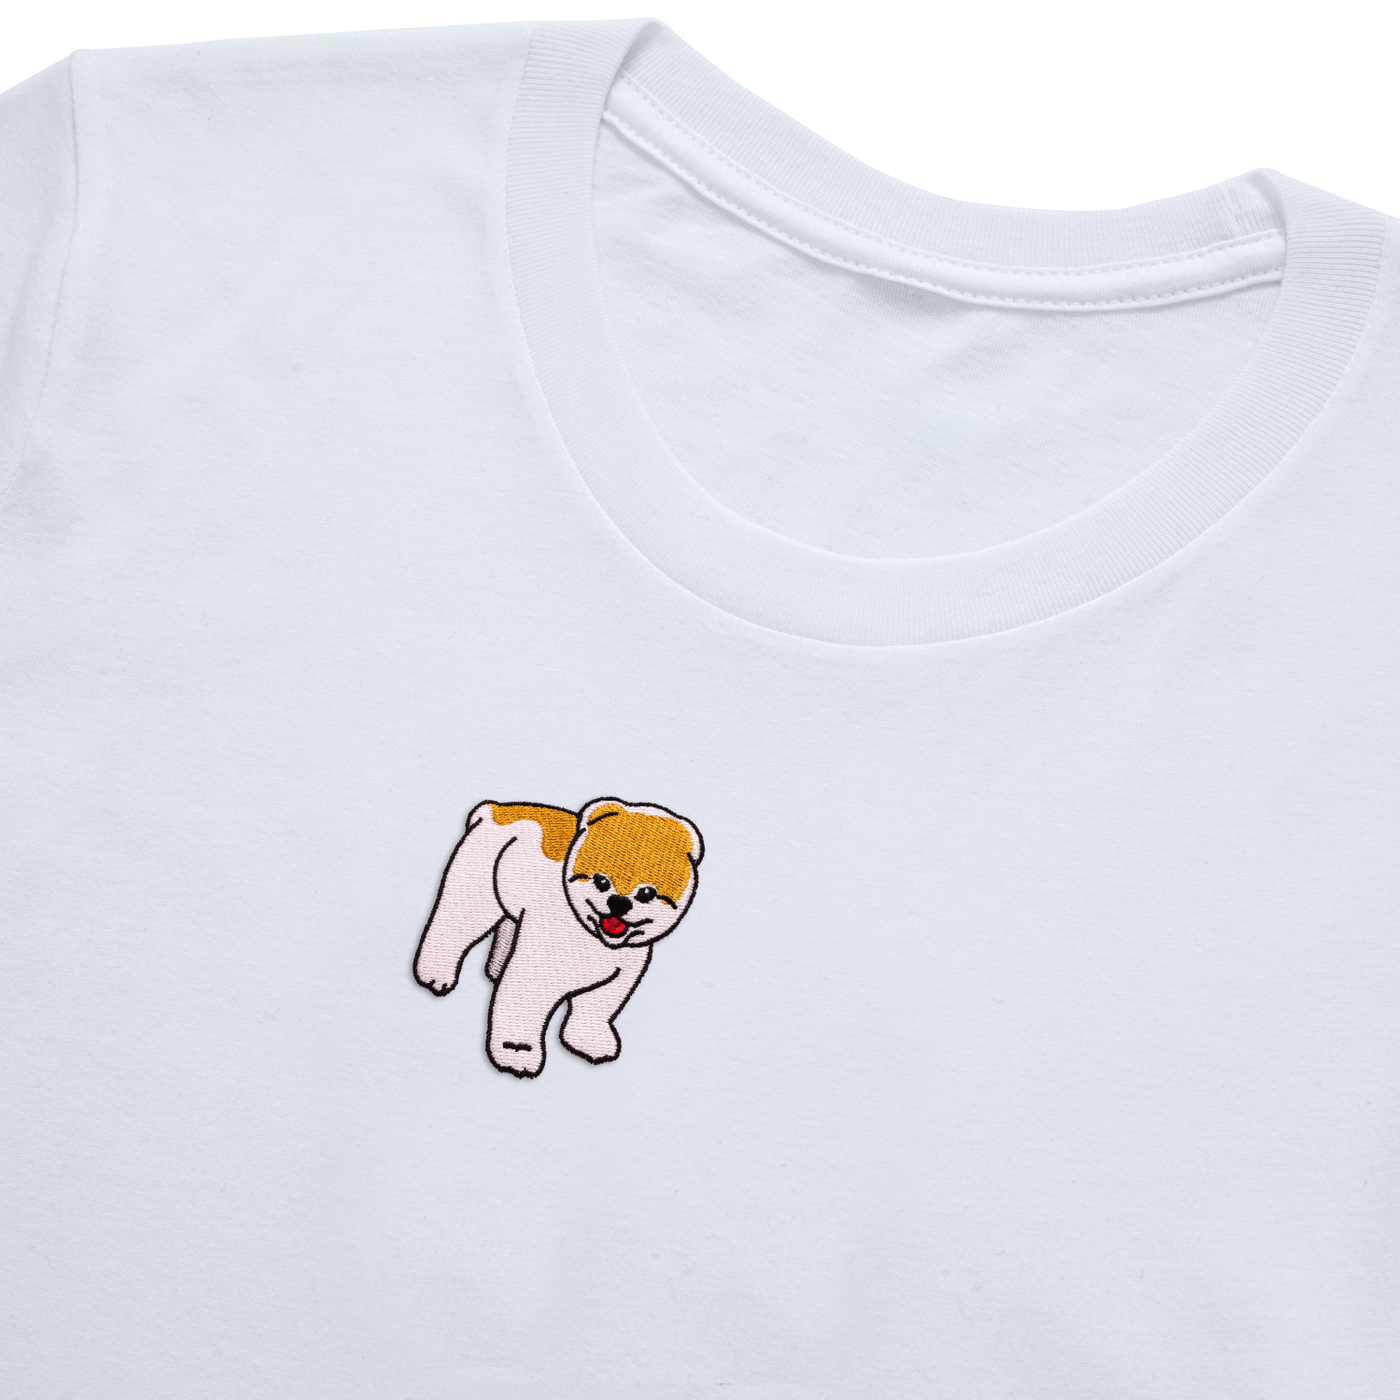 Bobby's Planet Women's Embroidered Pomeranian T-Shirt from Paws Dog Cat Animals Collection in White Color#color_white